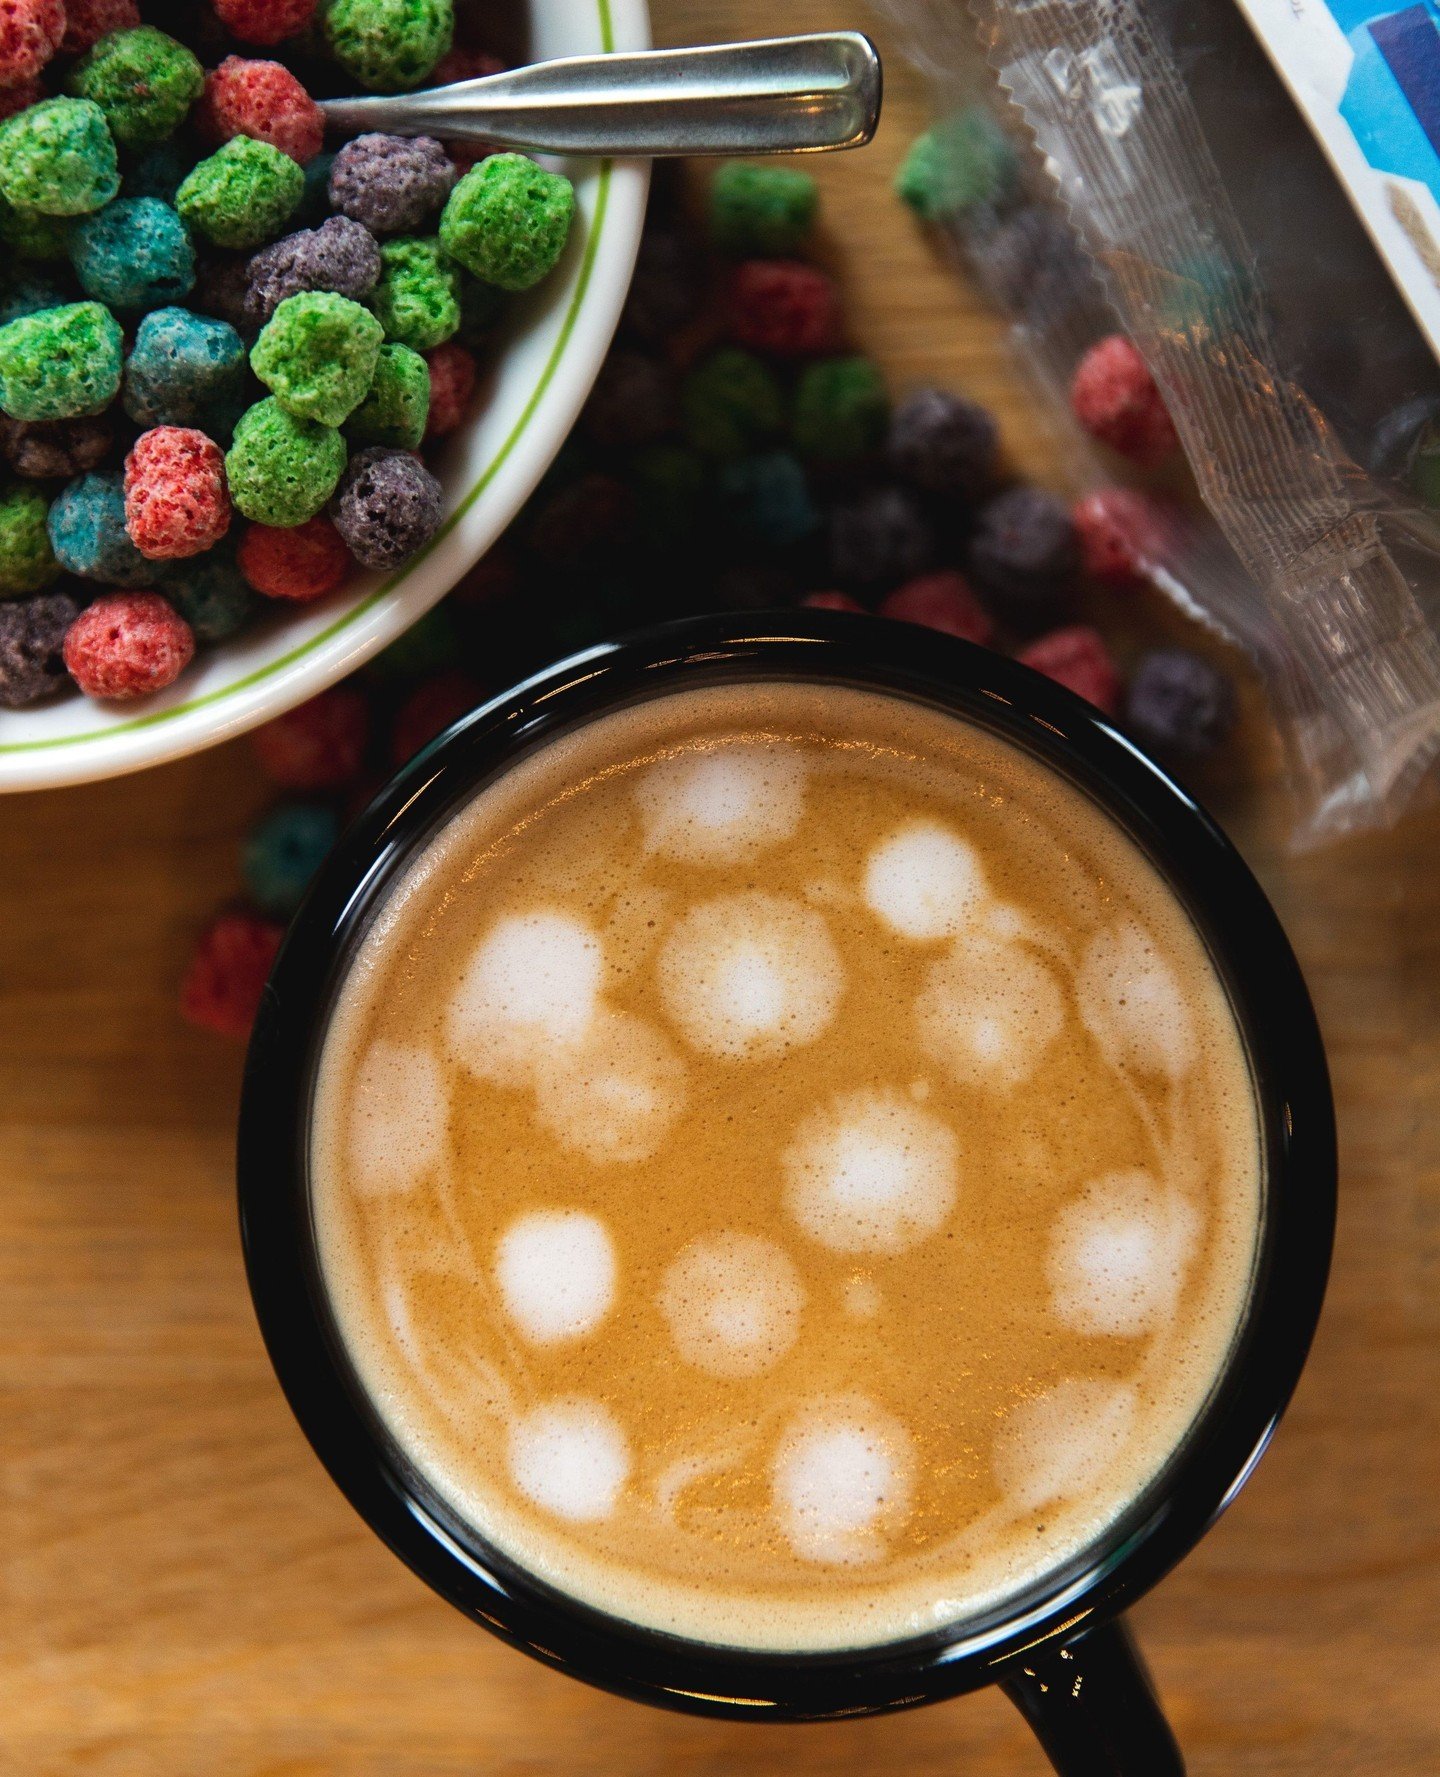 The Crunch Berry Latte is BACK just in time for summer break. 😎 ⁠
⁠
It's a secret combination that will remind you of your childhood days eating Captain Crunch and watching Captain Planet. Grab a bit of nostalgia and maybe stream a few of your favor